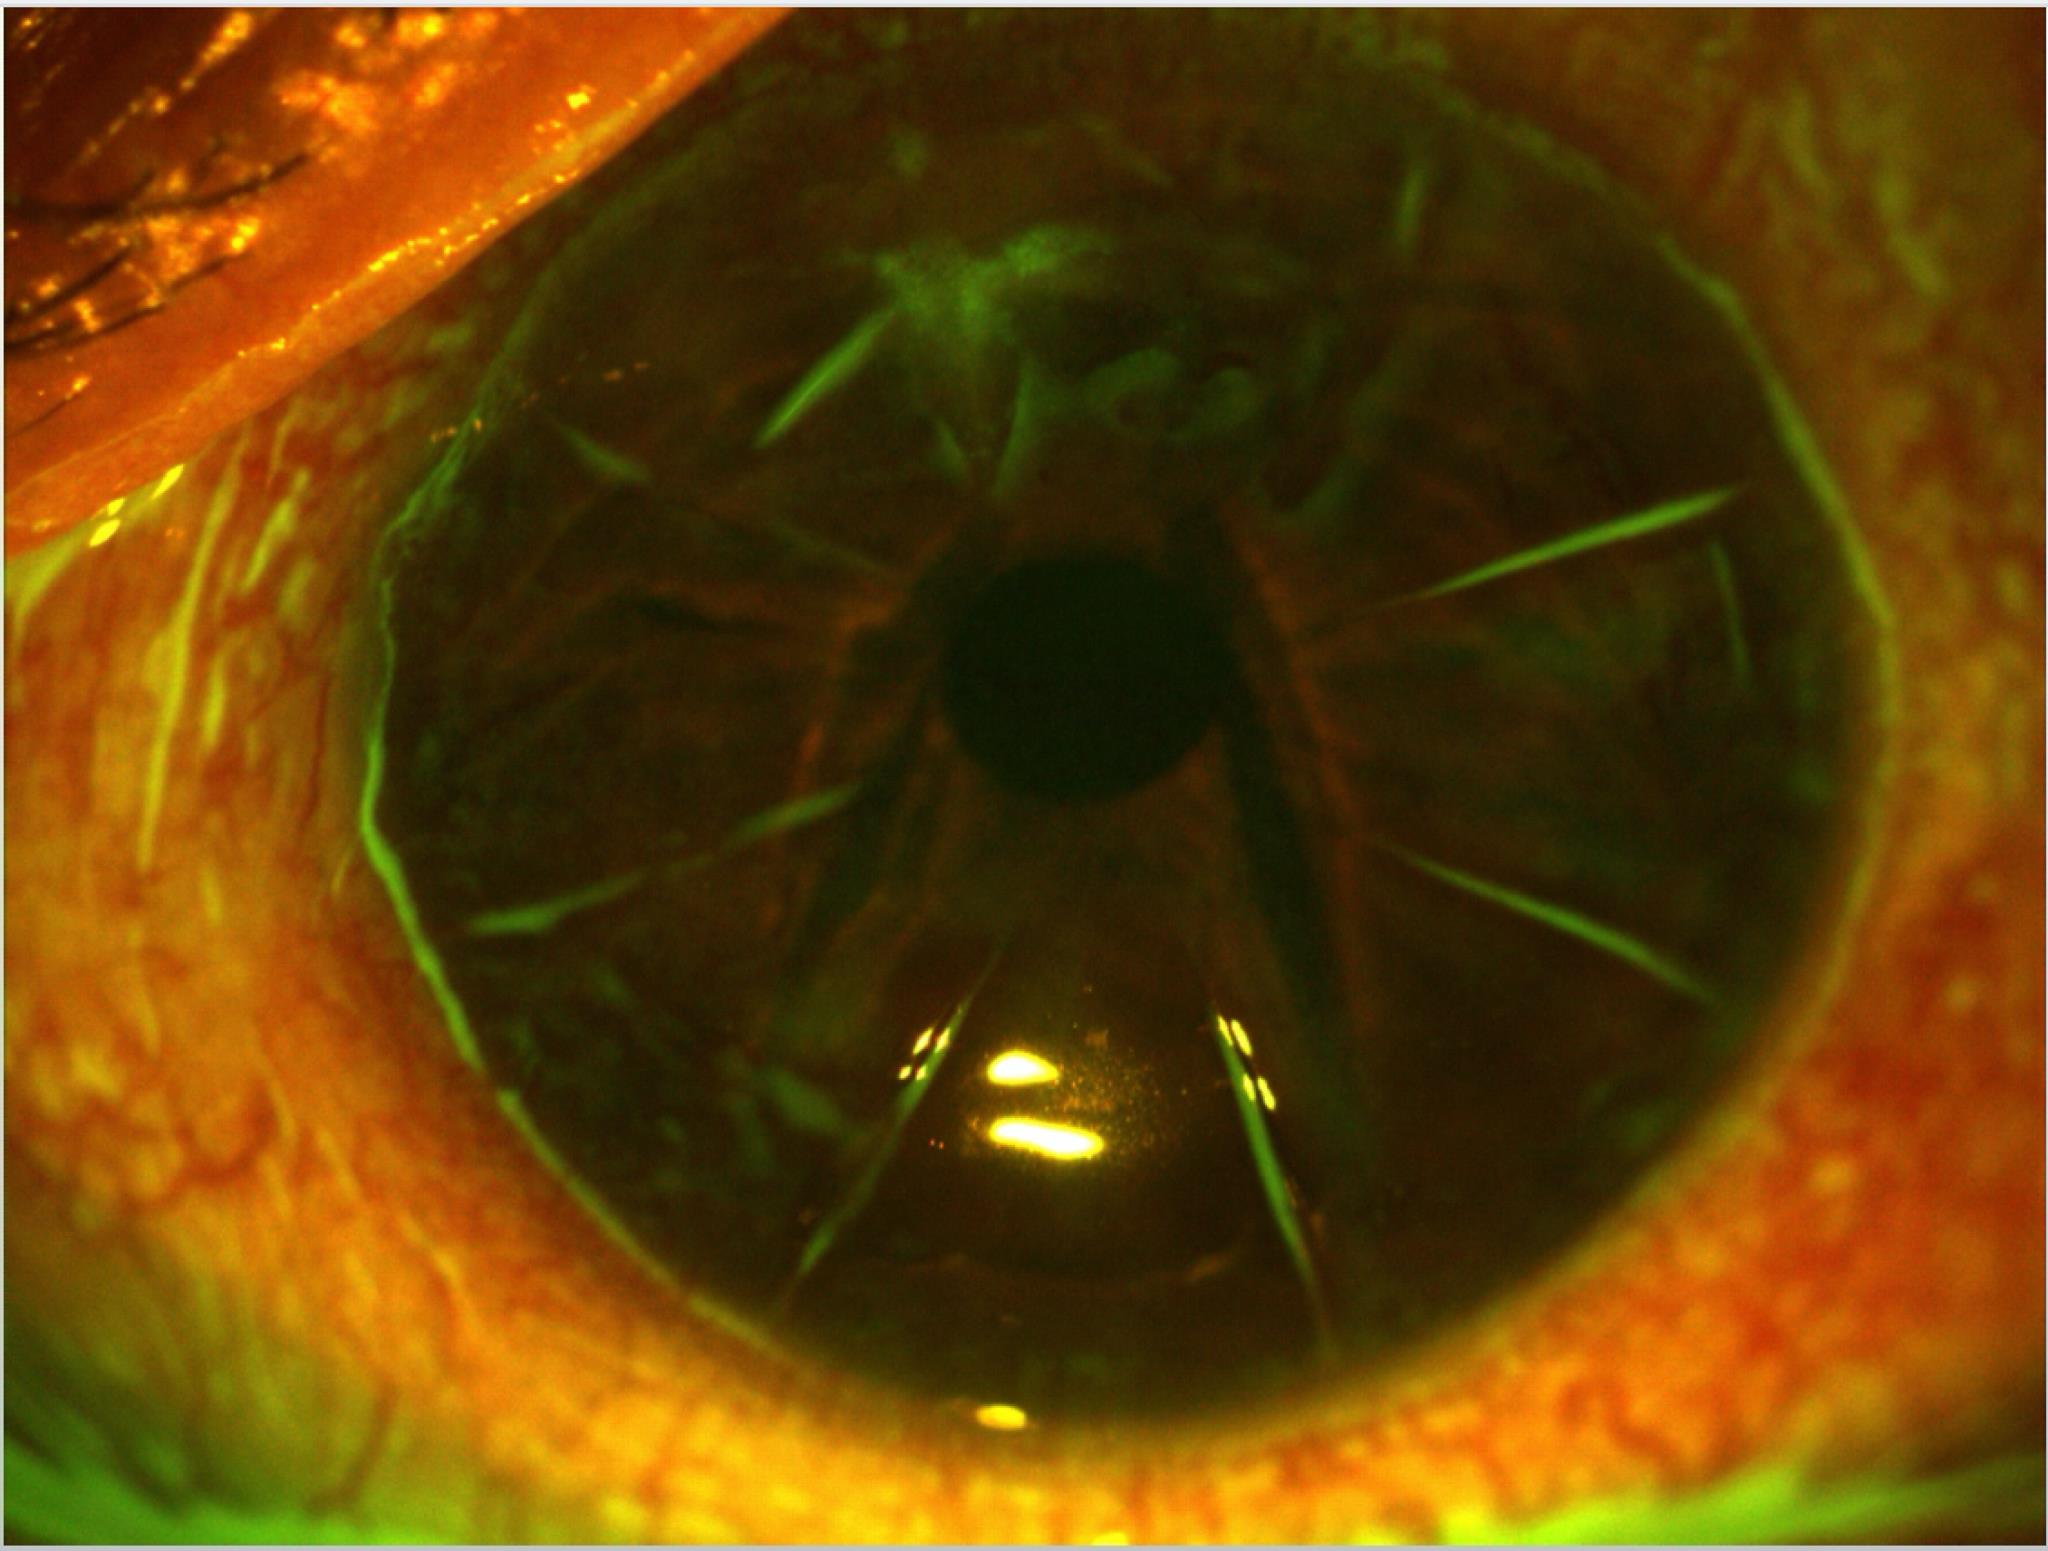 how do ophthalmologists correct nearsightedness in ten minutes with radial keratotomy